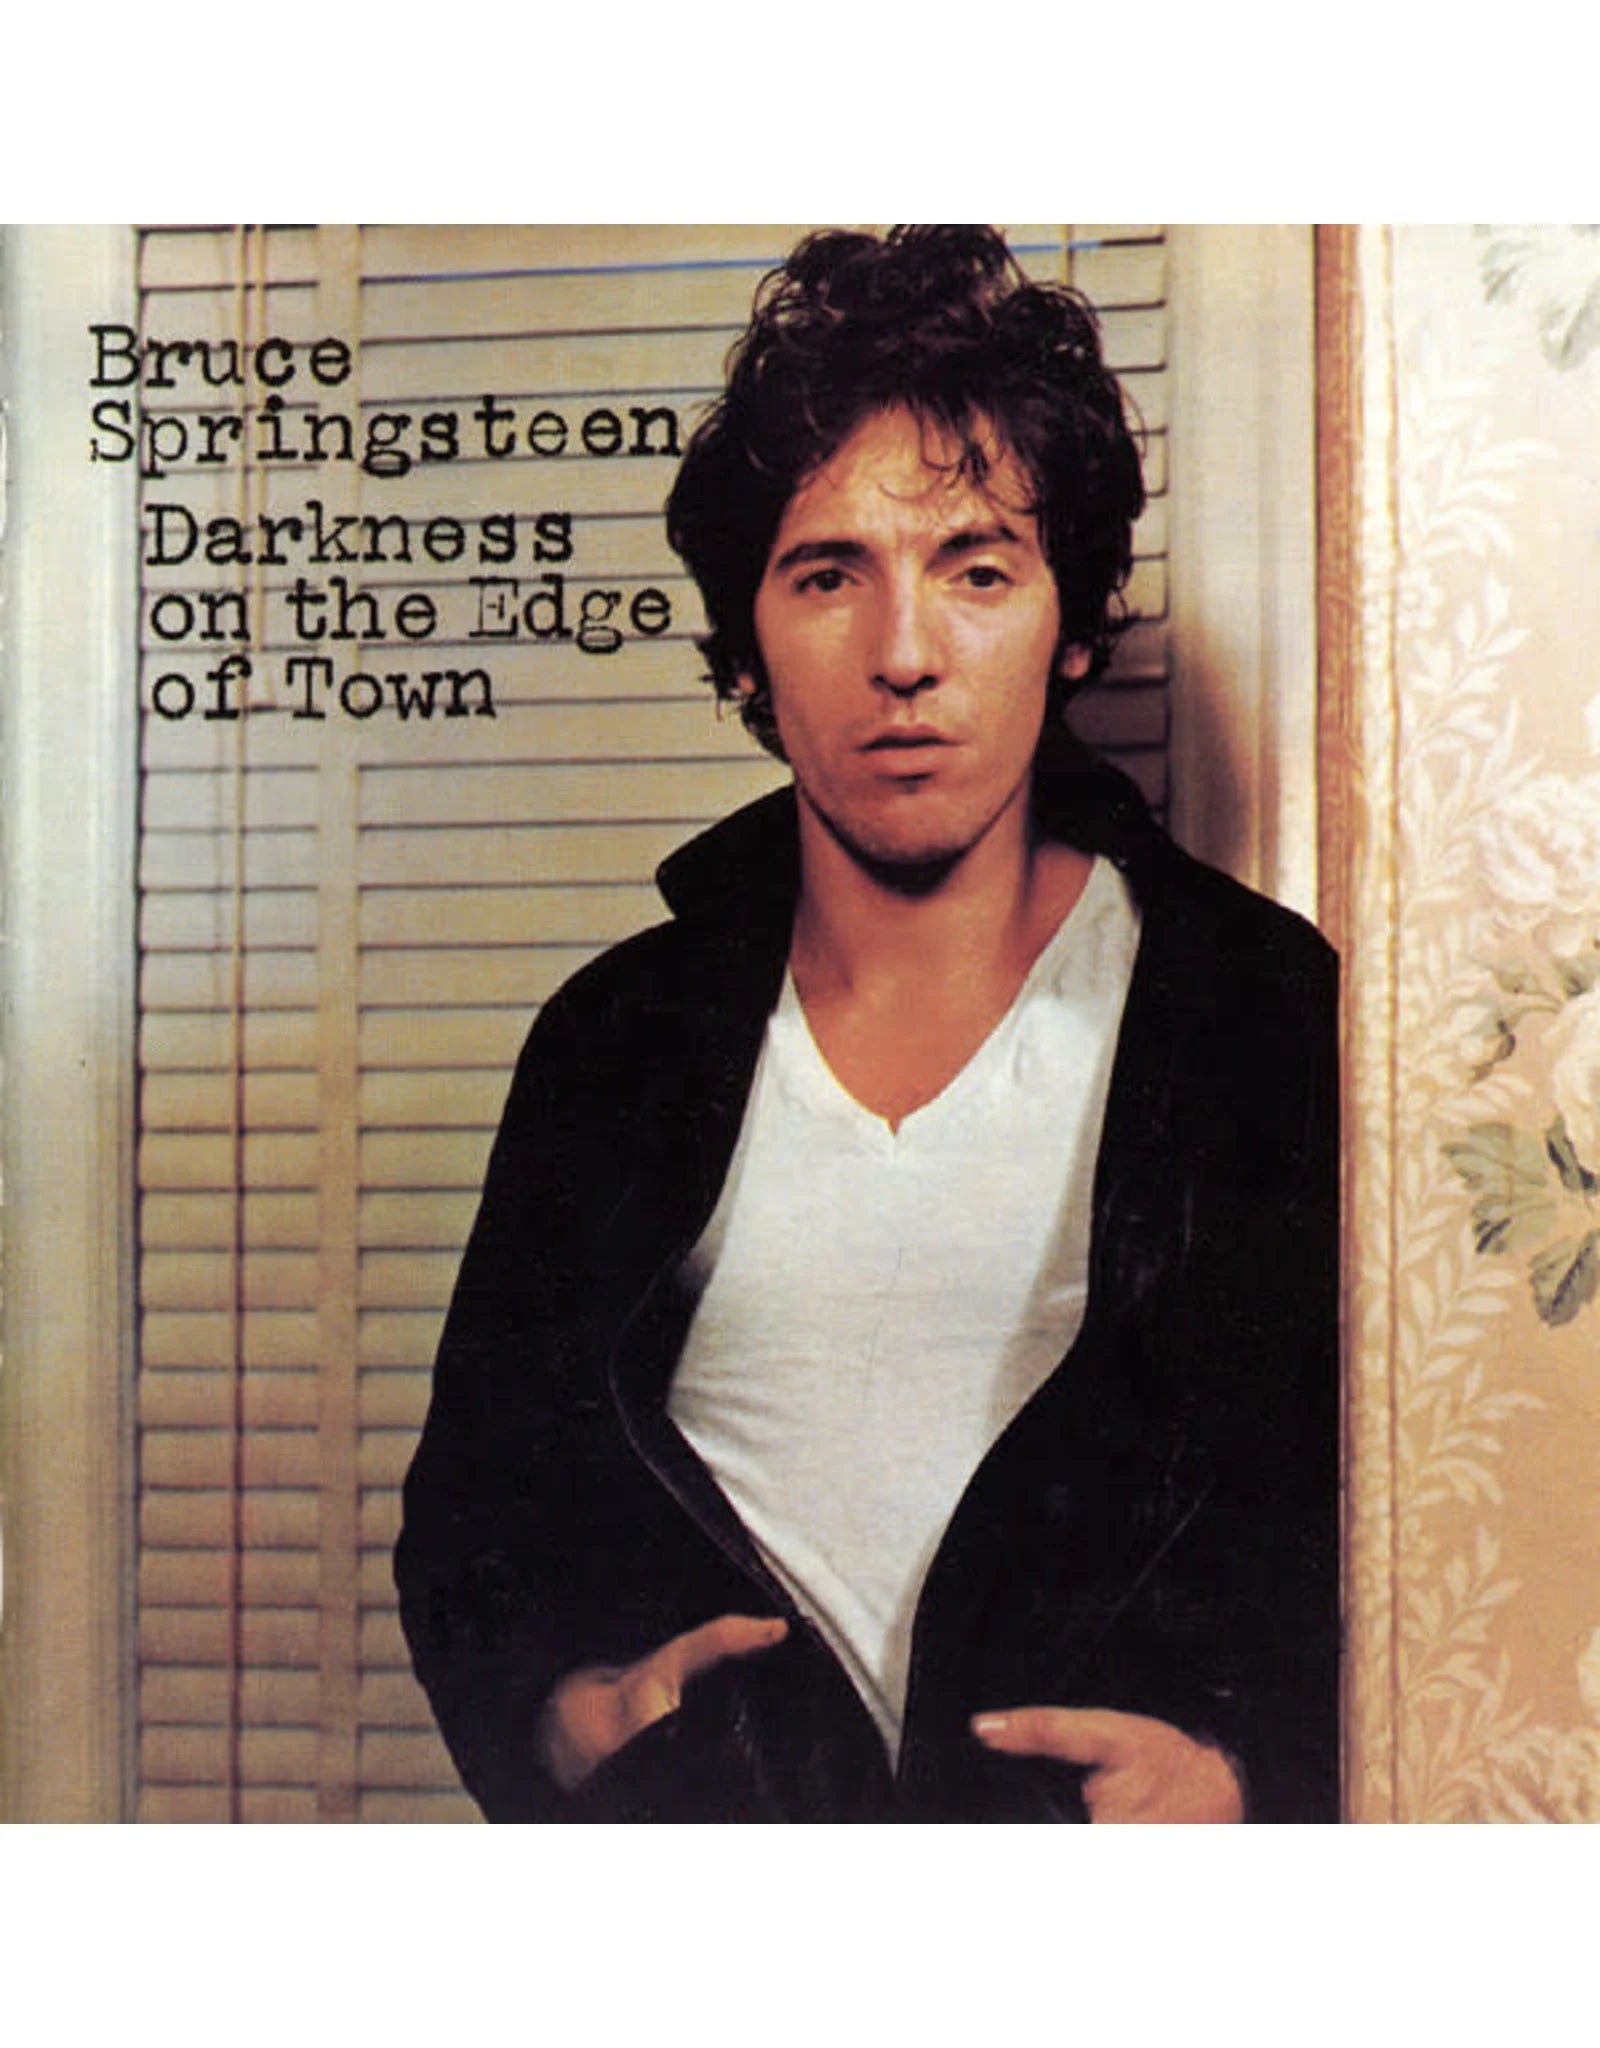 Bruce Springsteen - Darkness on the Edge of Town - LP - 180g Vinyl